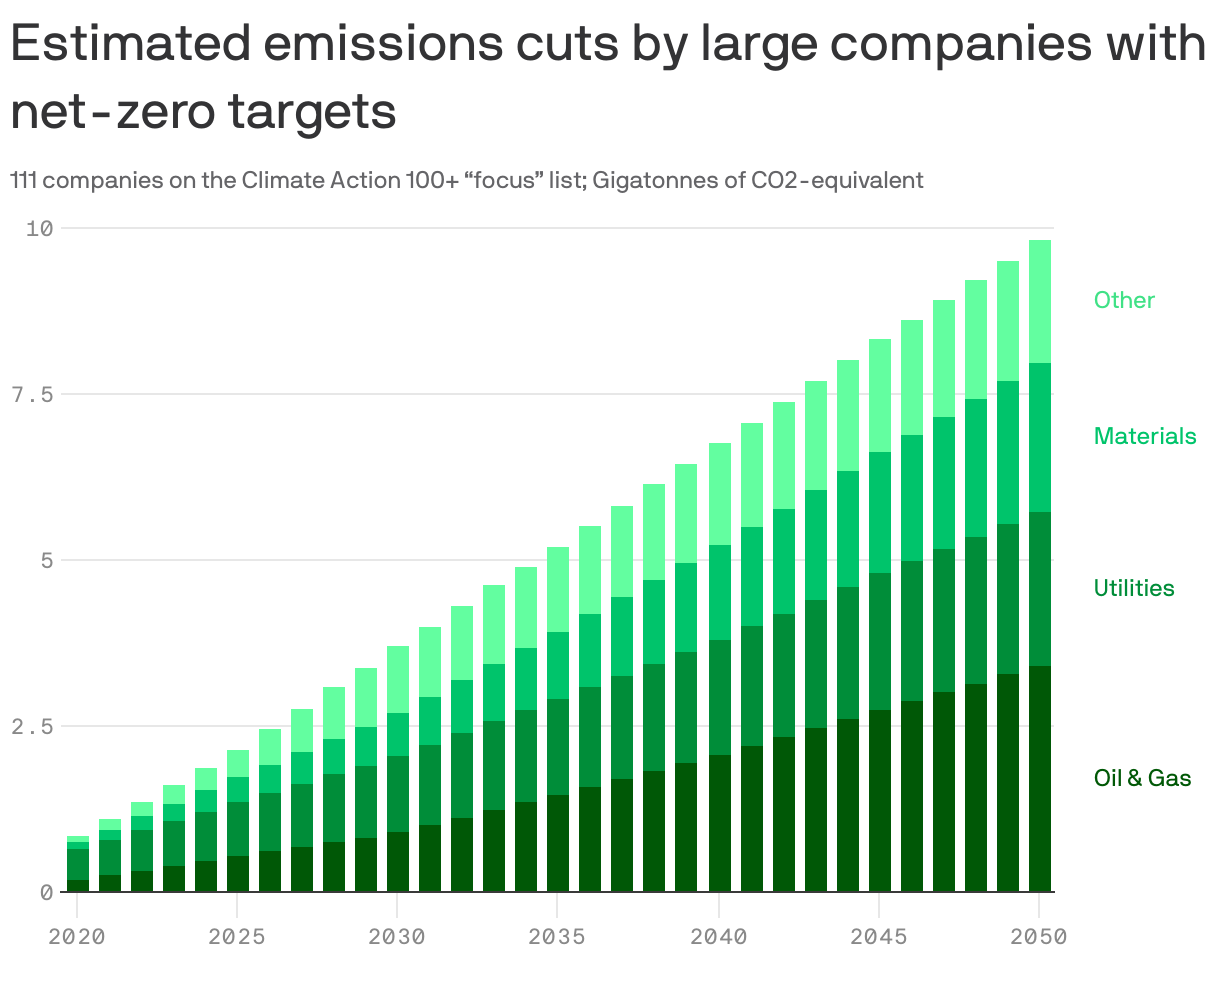 Estimated emissions cuts by large companies with net-zero targets